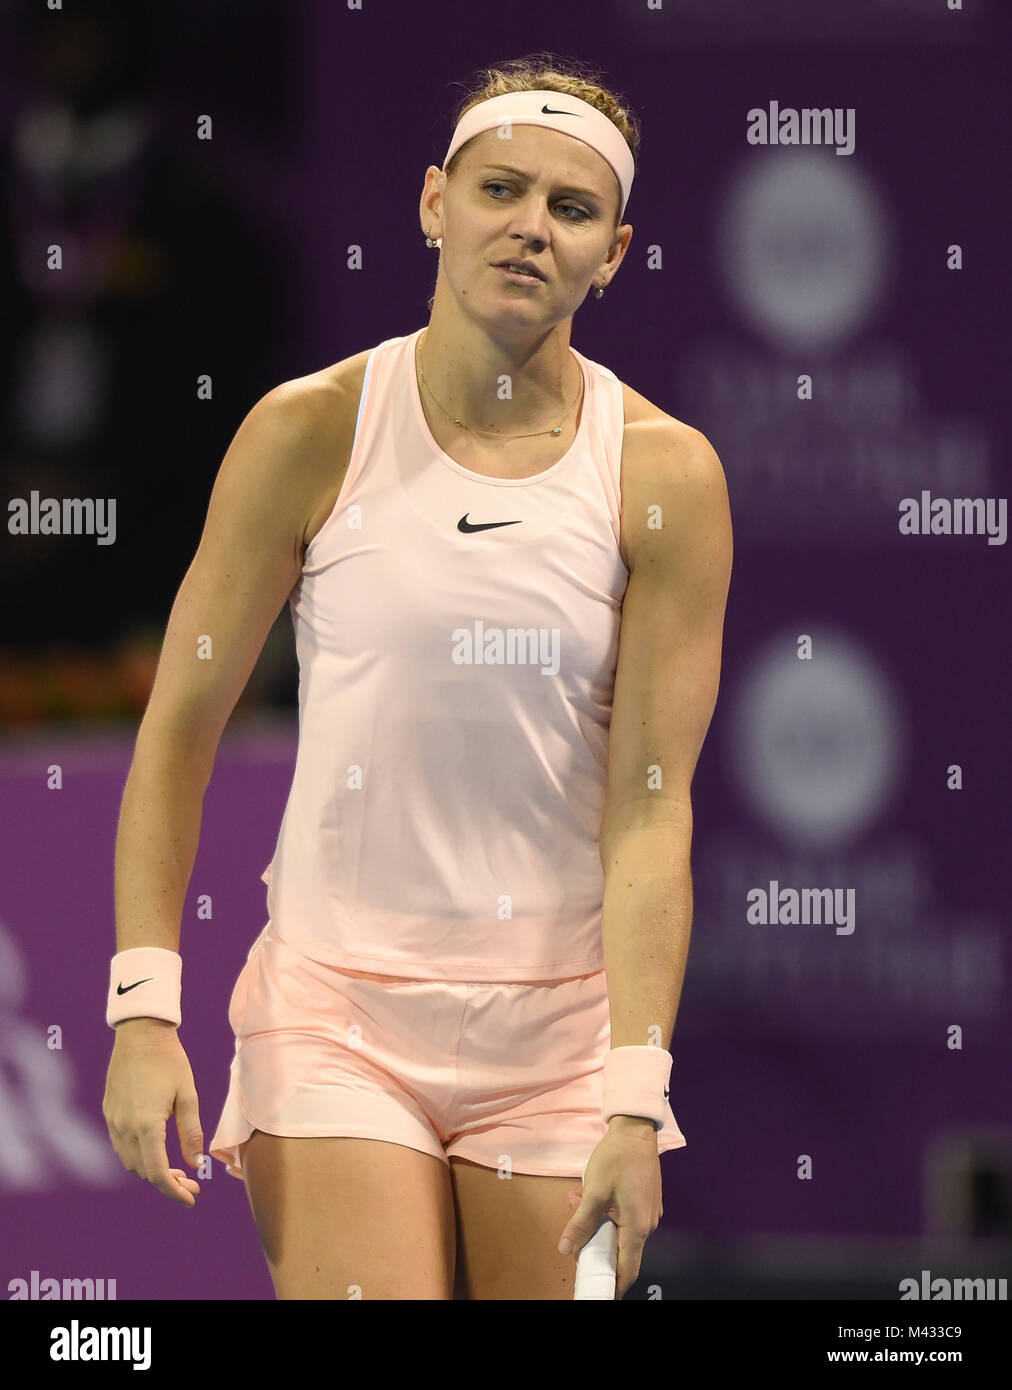 Doha, Qatar. 13th Feb, 2018. Lucie Safarova of Czech Republic reacts during the single's first round match against Julia Goerges of Germany at the 2018 WTA Qatar Open in Doha, Qatar, on Feb. 13, 2018. Julia Goerges won 2-0. Credit: Nikku/Xinhua/Alamy Live News Stock Photo